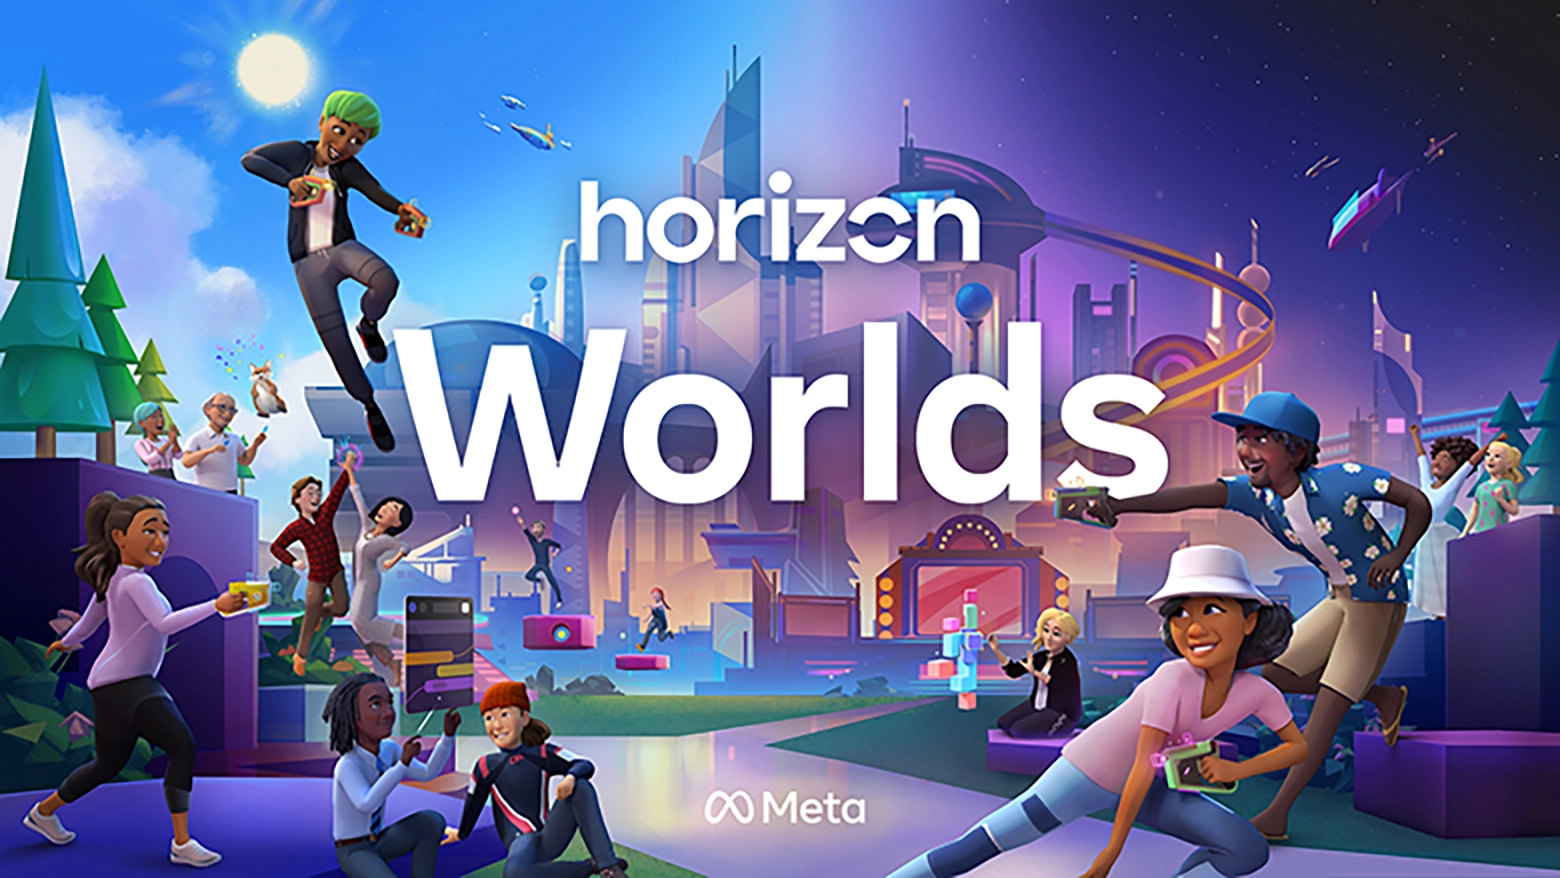 Horizon Worlds still has many issues affecting its usability